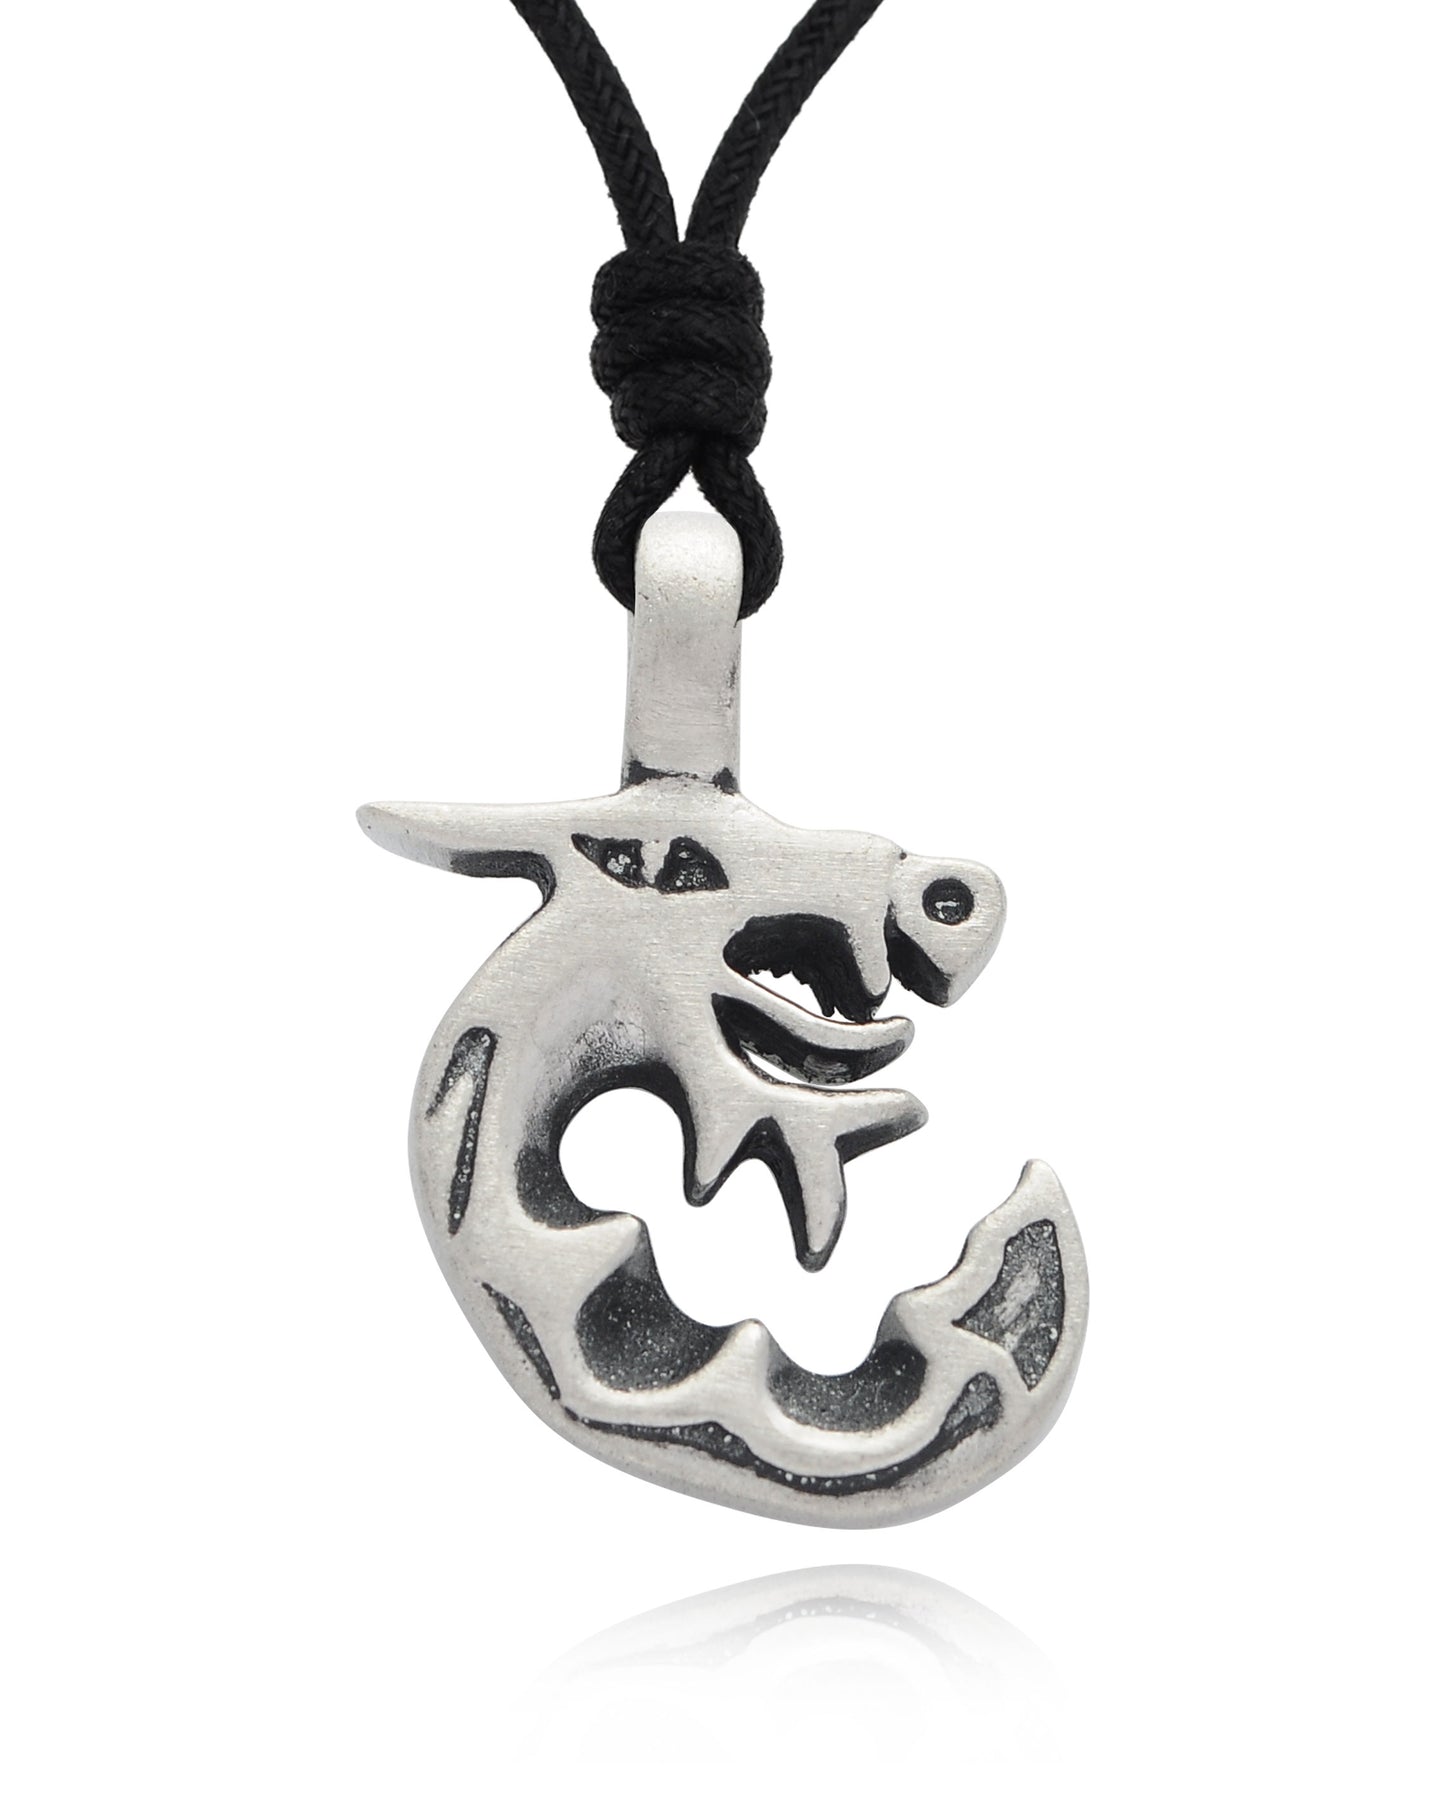 Baby Dragon Silver Pewter Charm Necklace Pendant Jewelry